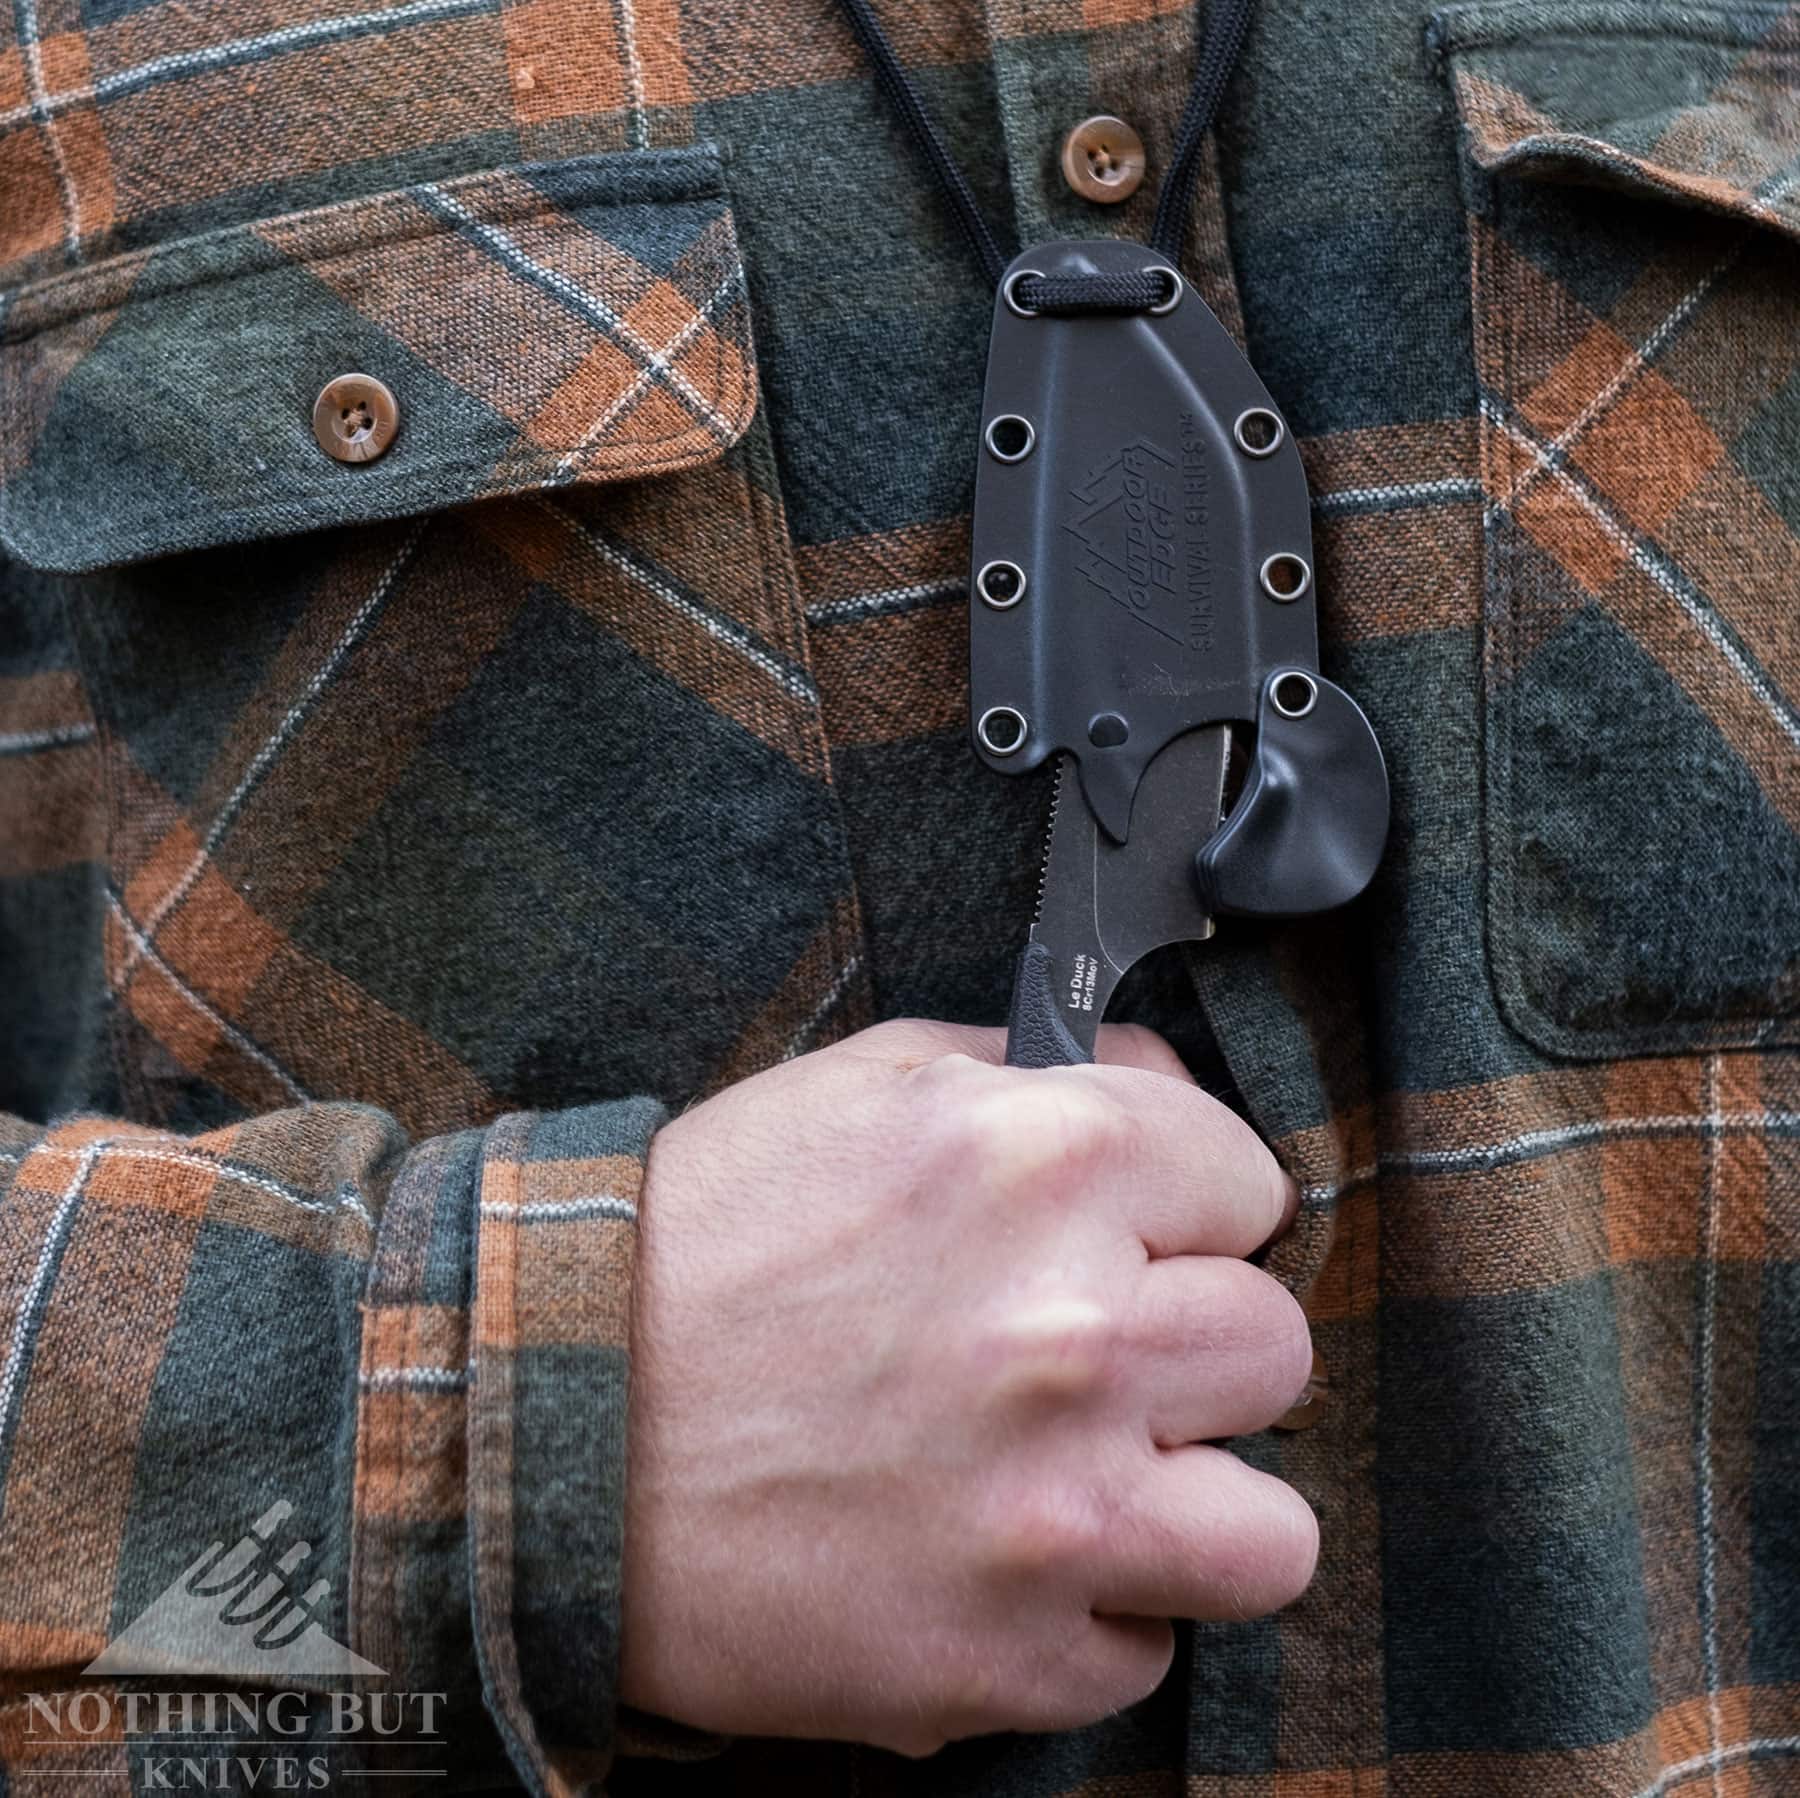 The Outdoor Edge Le Duck can be worn on the waist or as a neck knife.